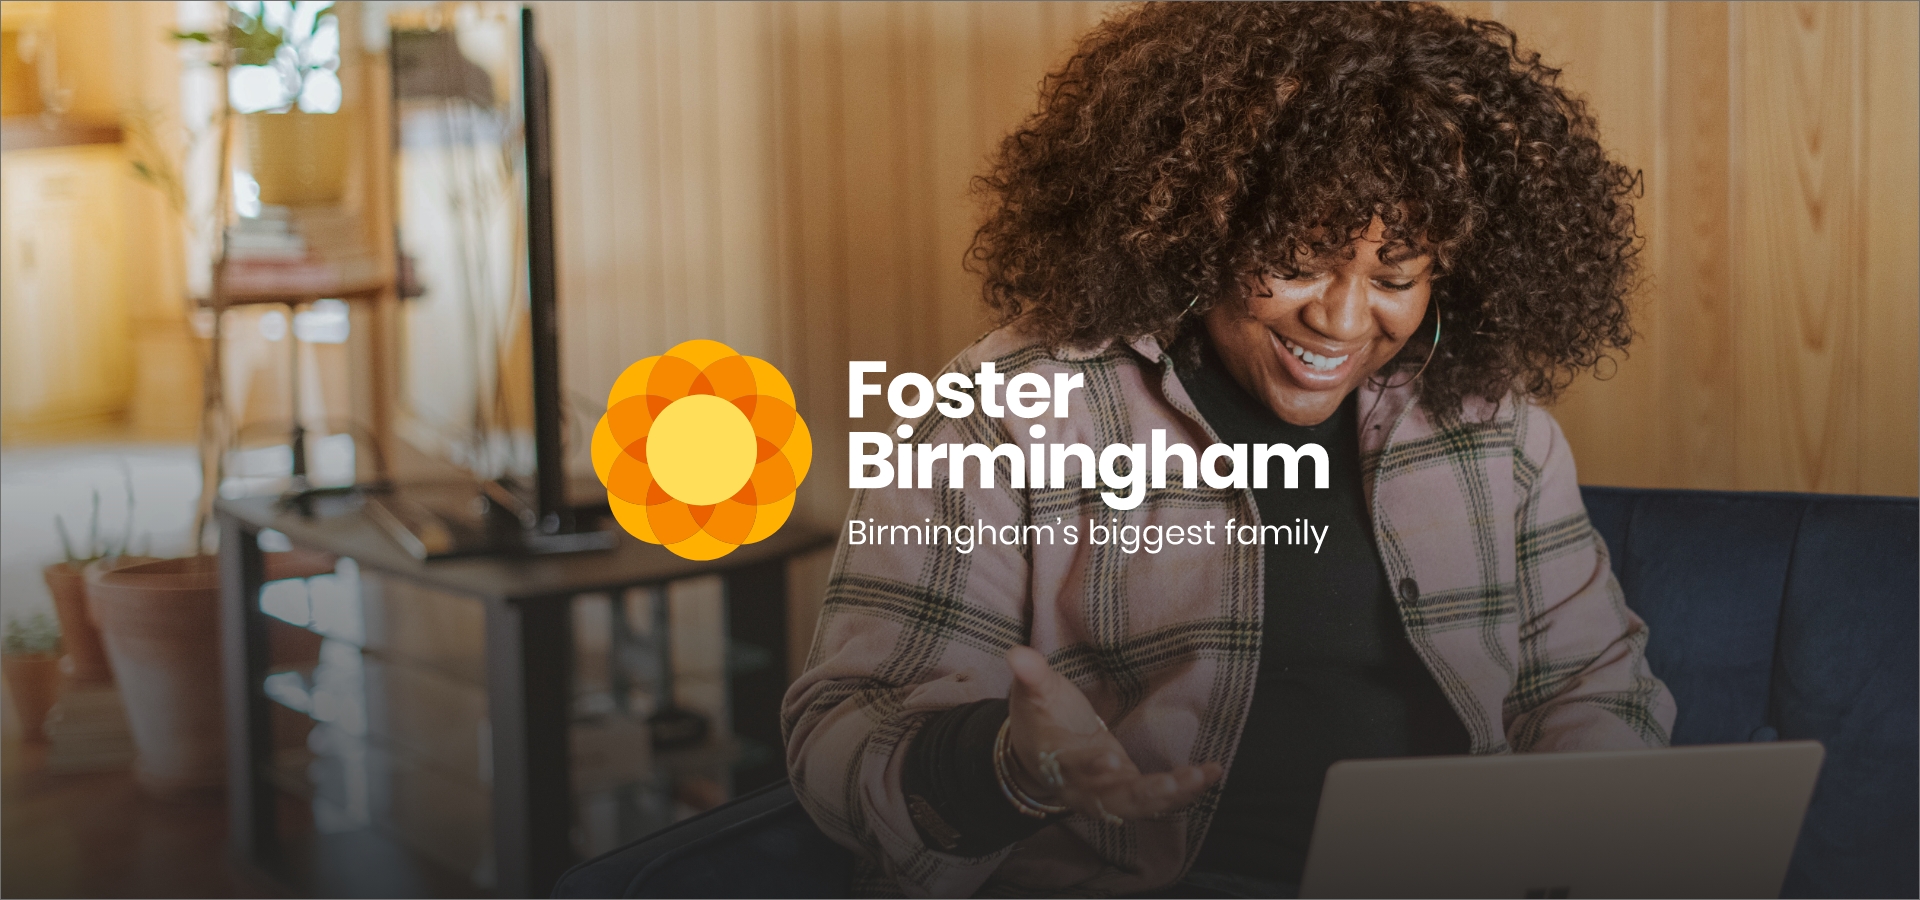 The hero image for Foster Birmingham, a project of Liverpool based design agency, Hopeful Studio.